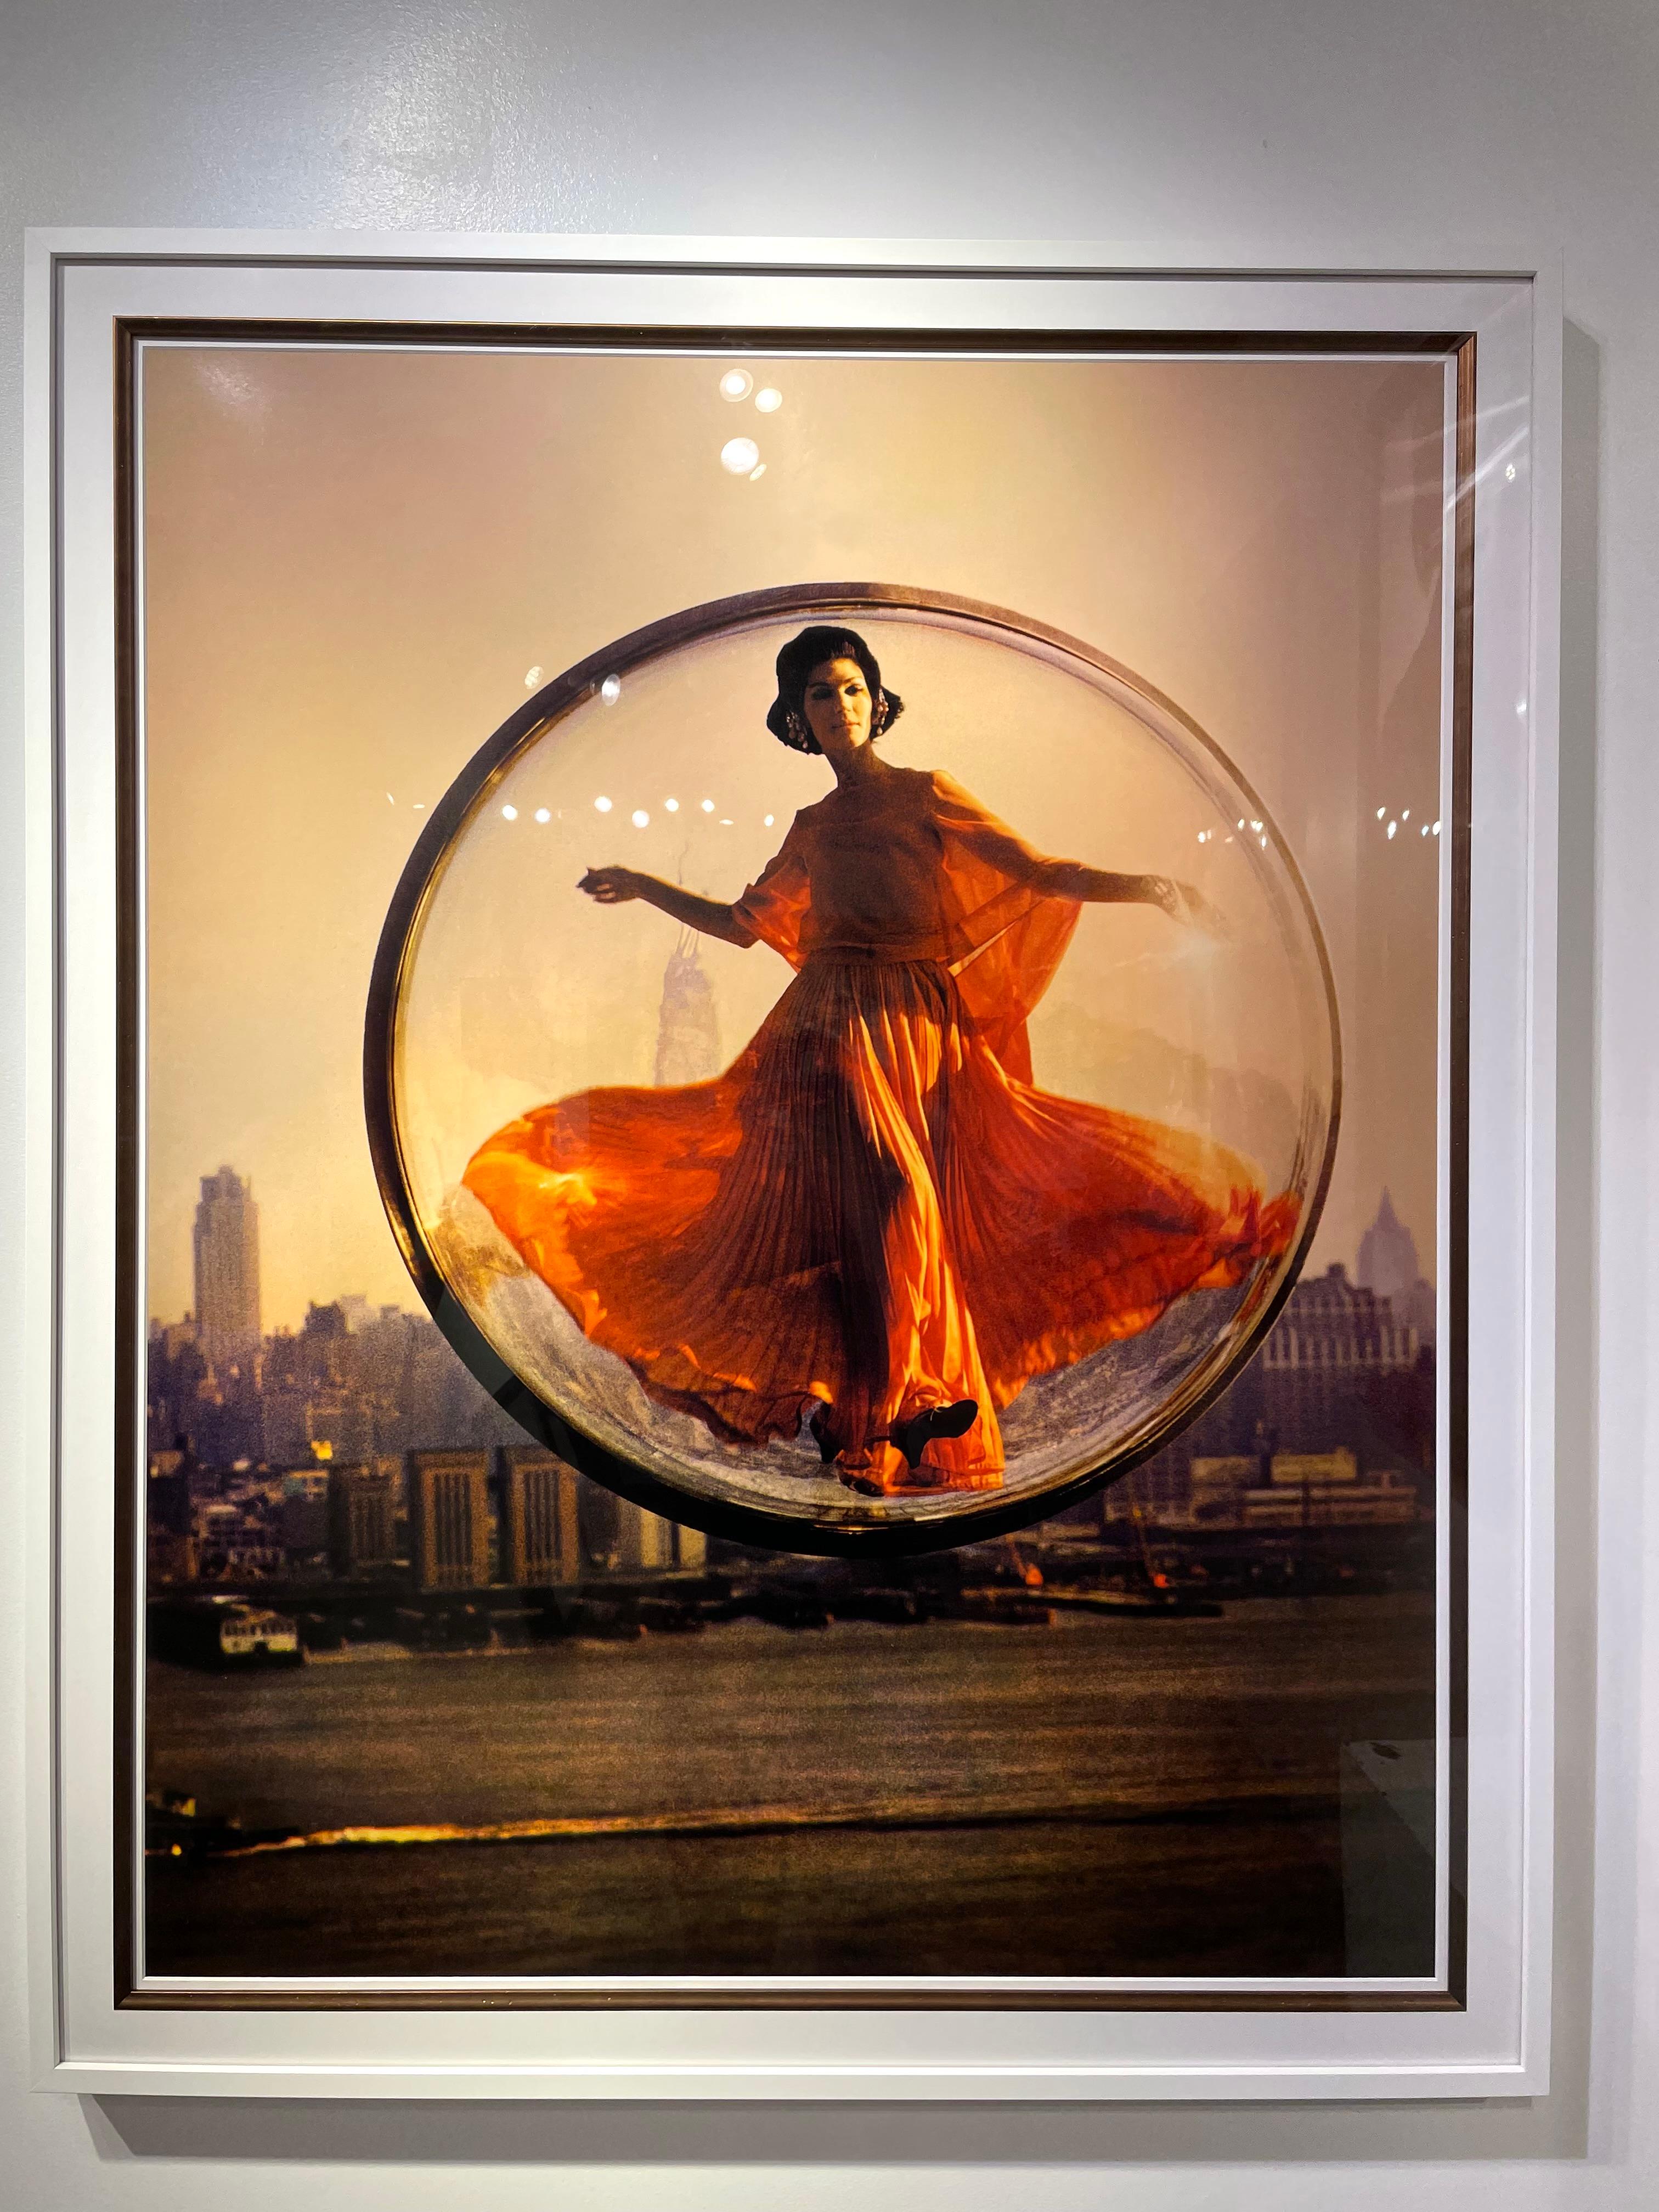 Over New York, Color - Photograph by Melvin Sokolsky